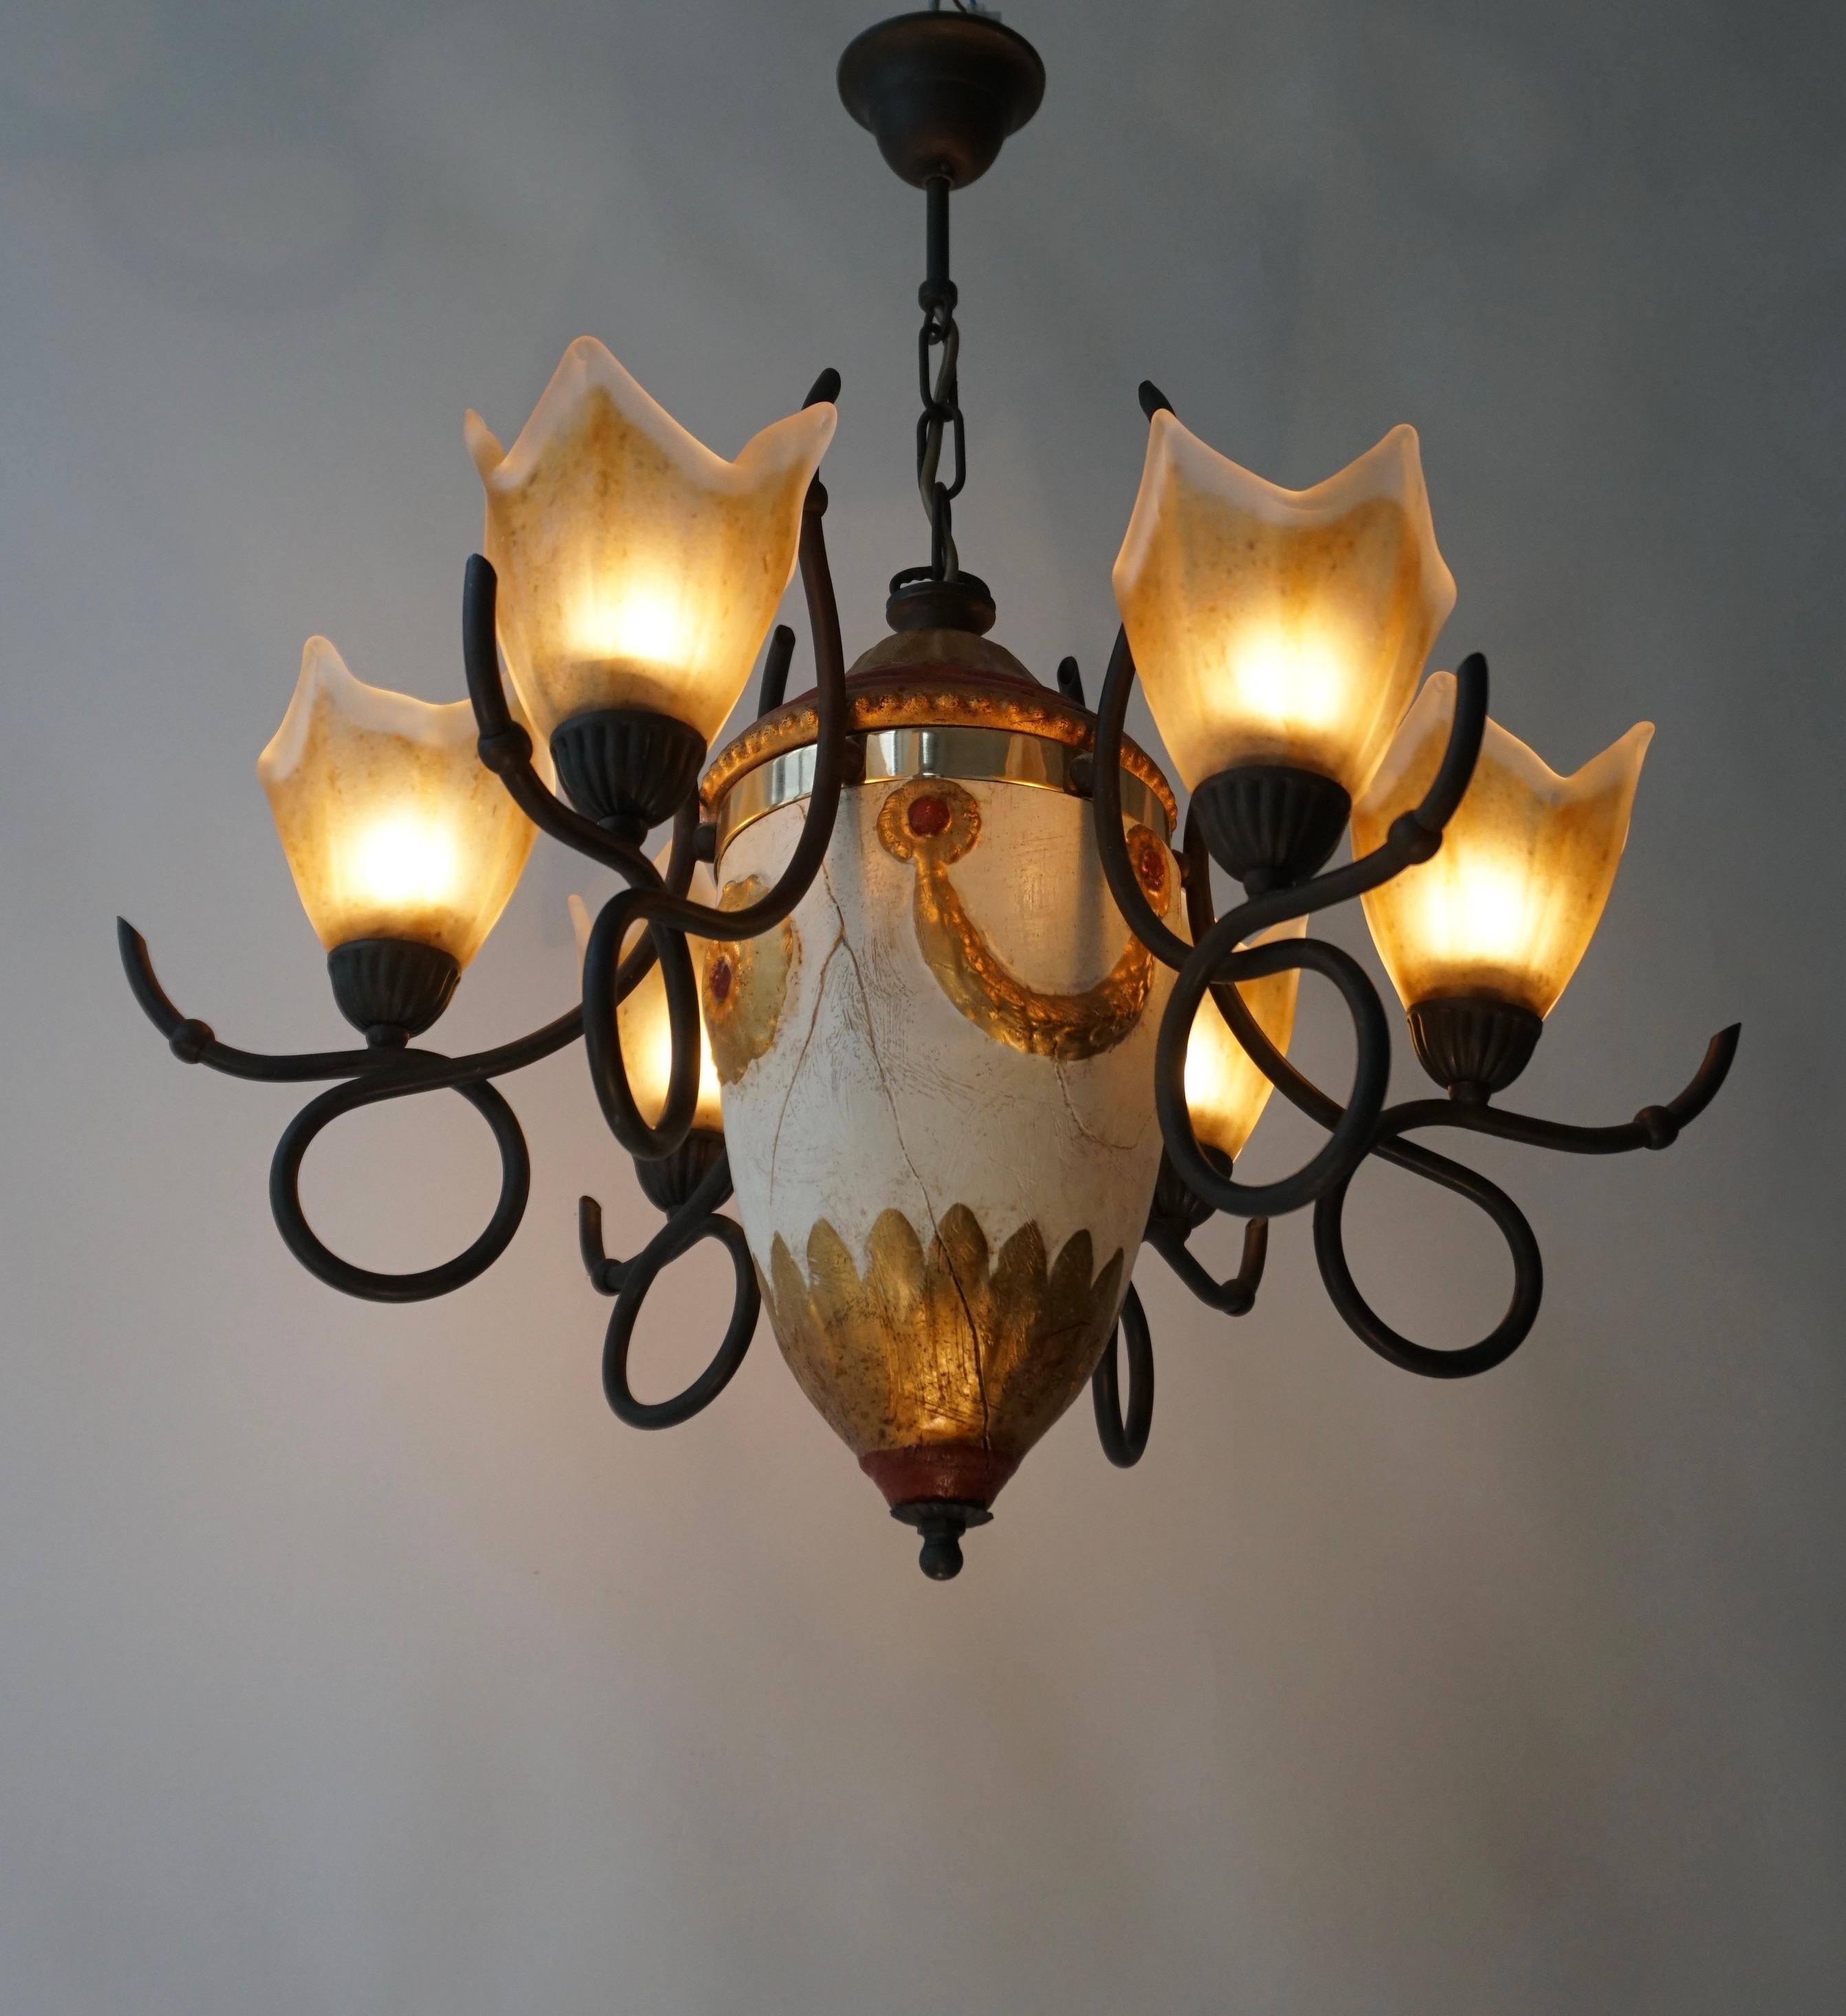 A  Hollywood Regency six-armed Italian chandelier in glass and painted wood manufactured in the mid-century (1970s). 

The chandelier has six sockets for small incandescent lamps with screw base or E14 type LEDs. It is possible to install this